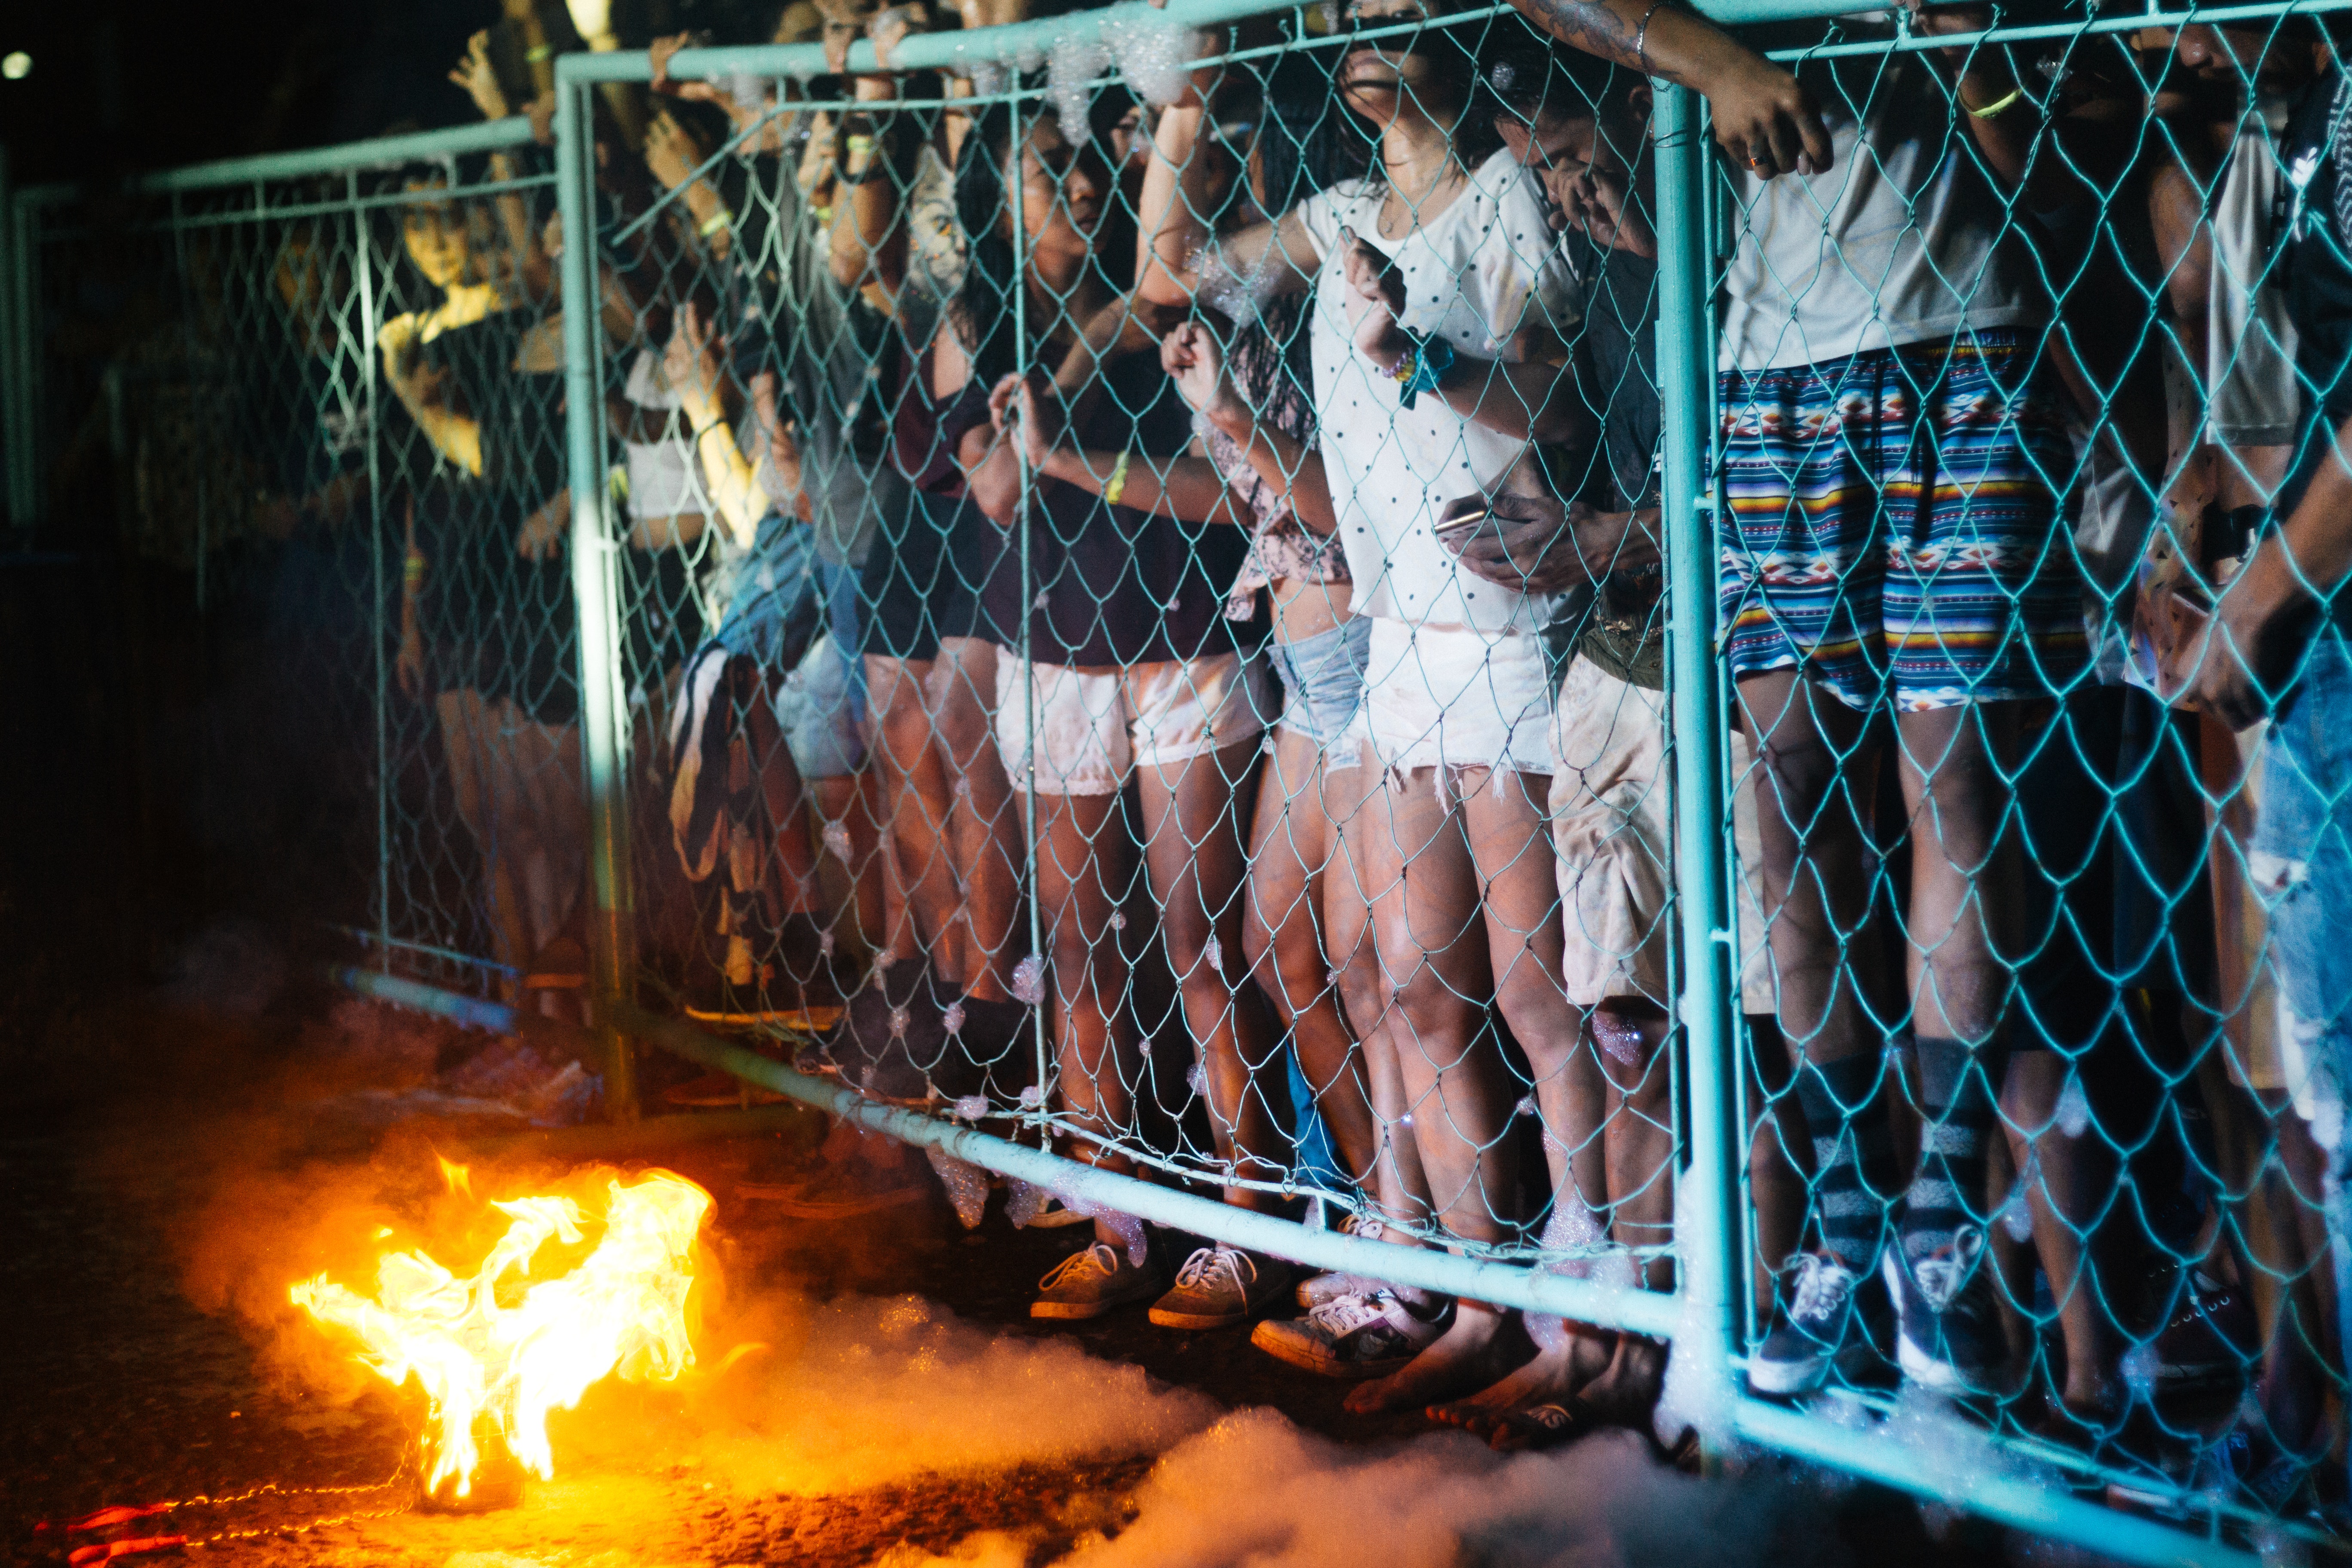 People Outside the Fence, Adult, Bonfire, Crowd, Evening, HQ Photo